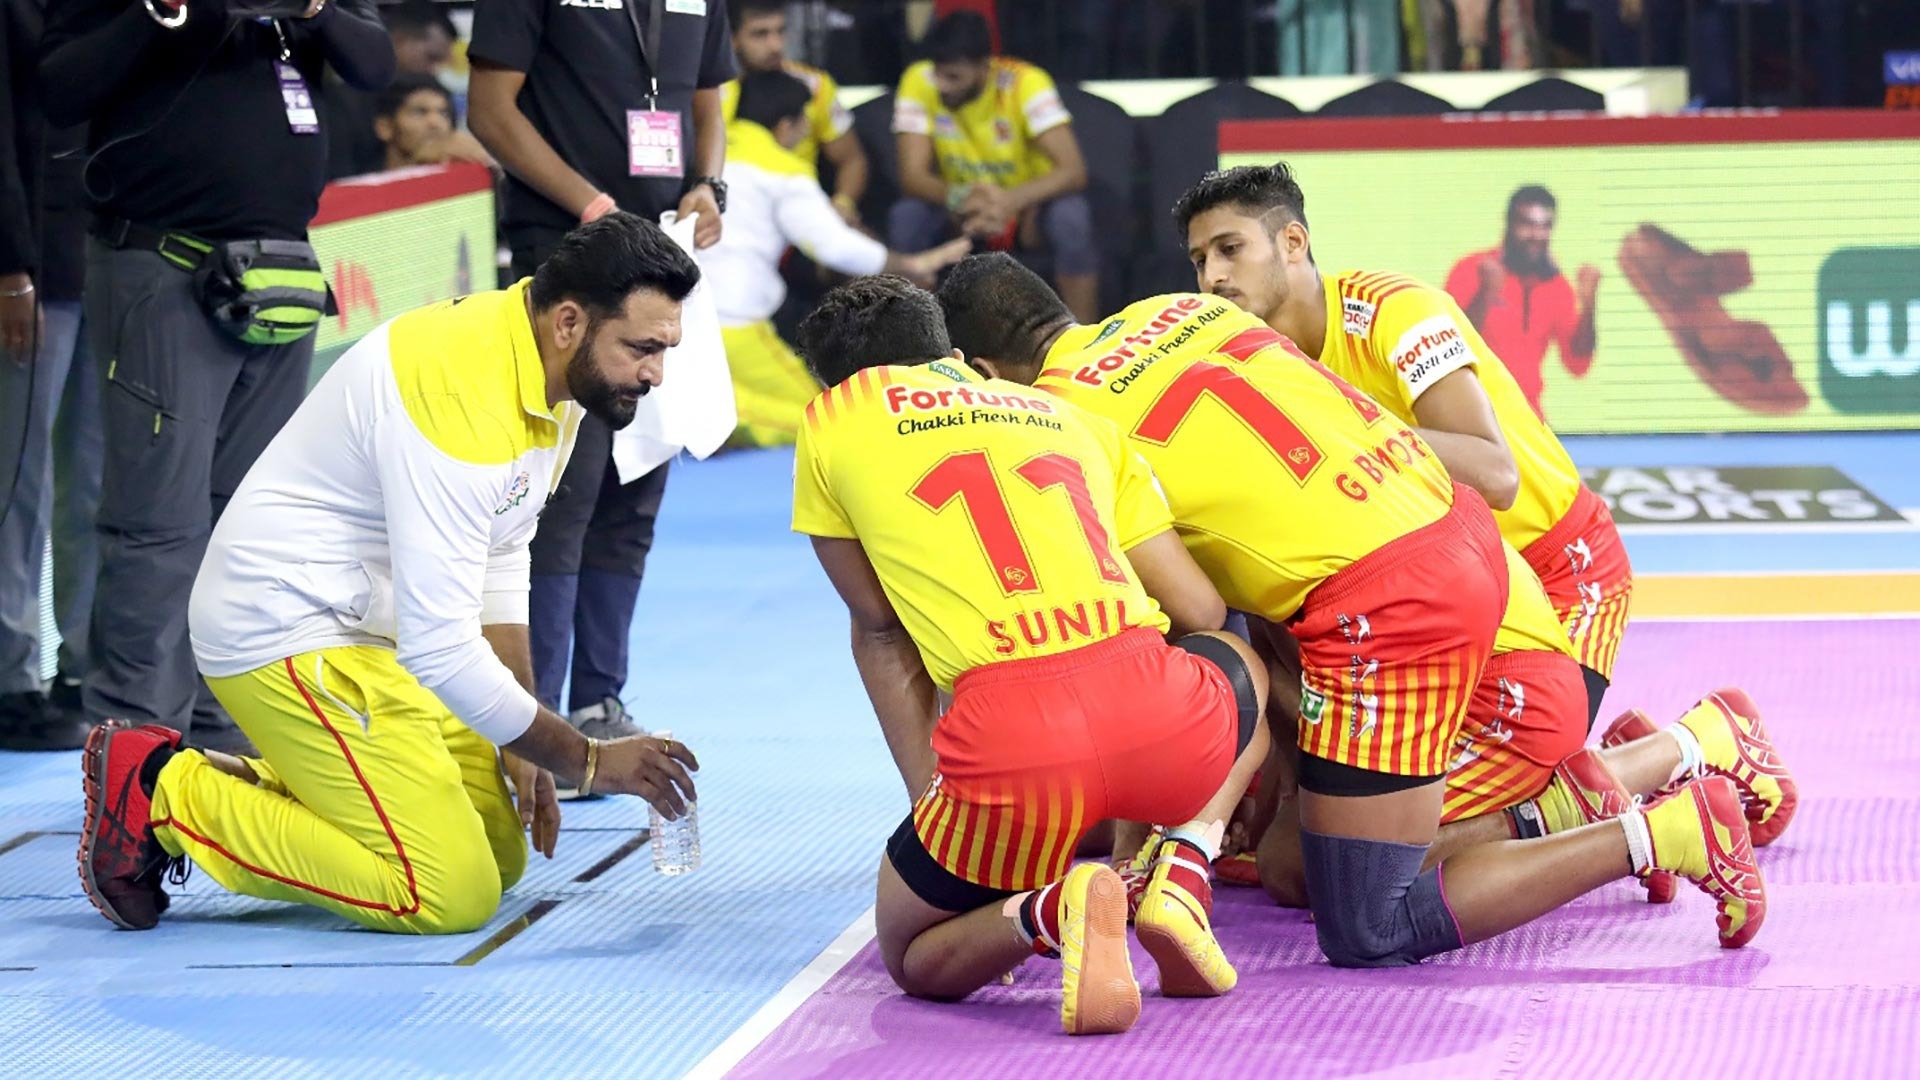 PKL 2019 | Have proven ourselves through our performance, says Manpreet Singh